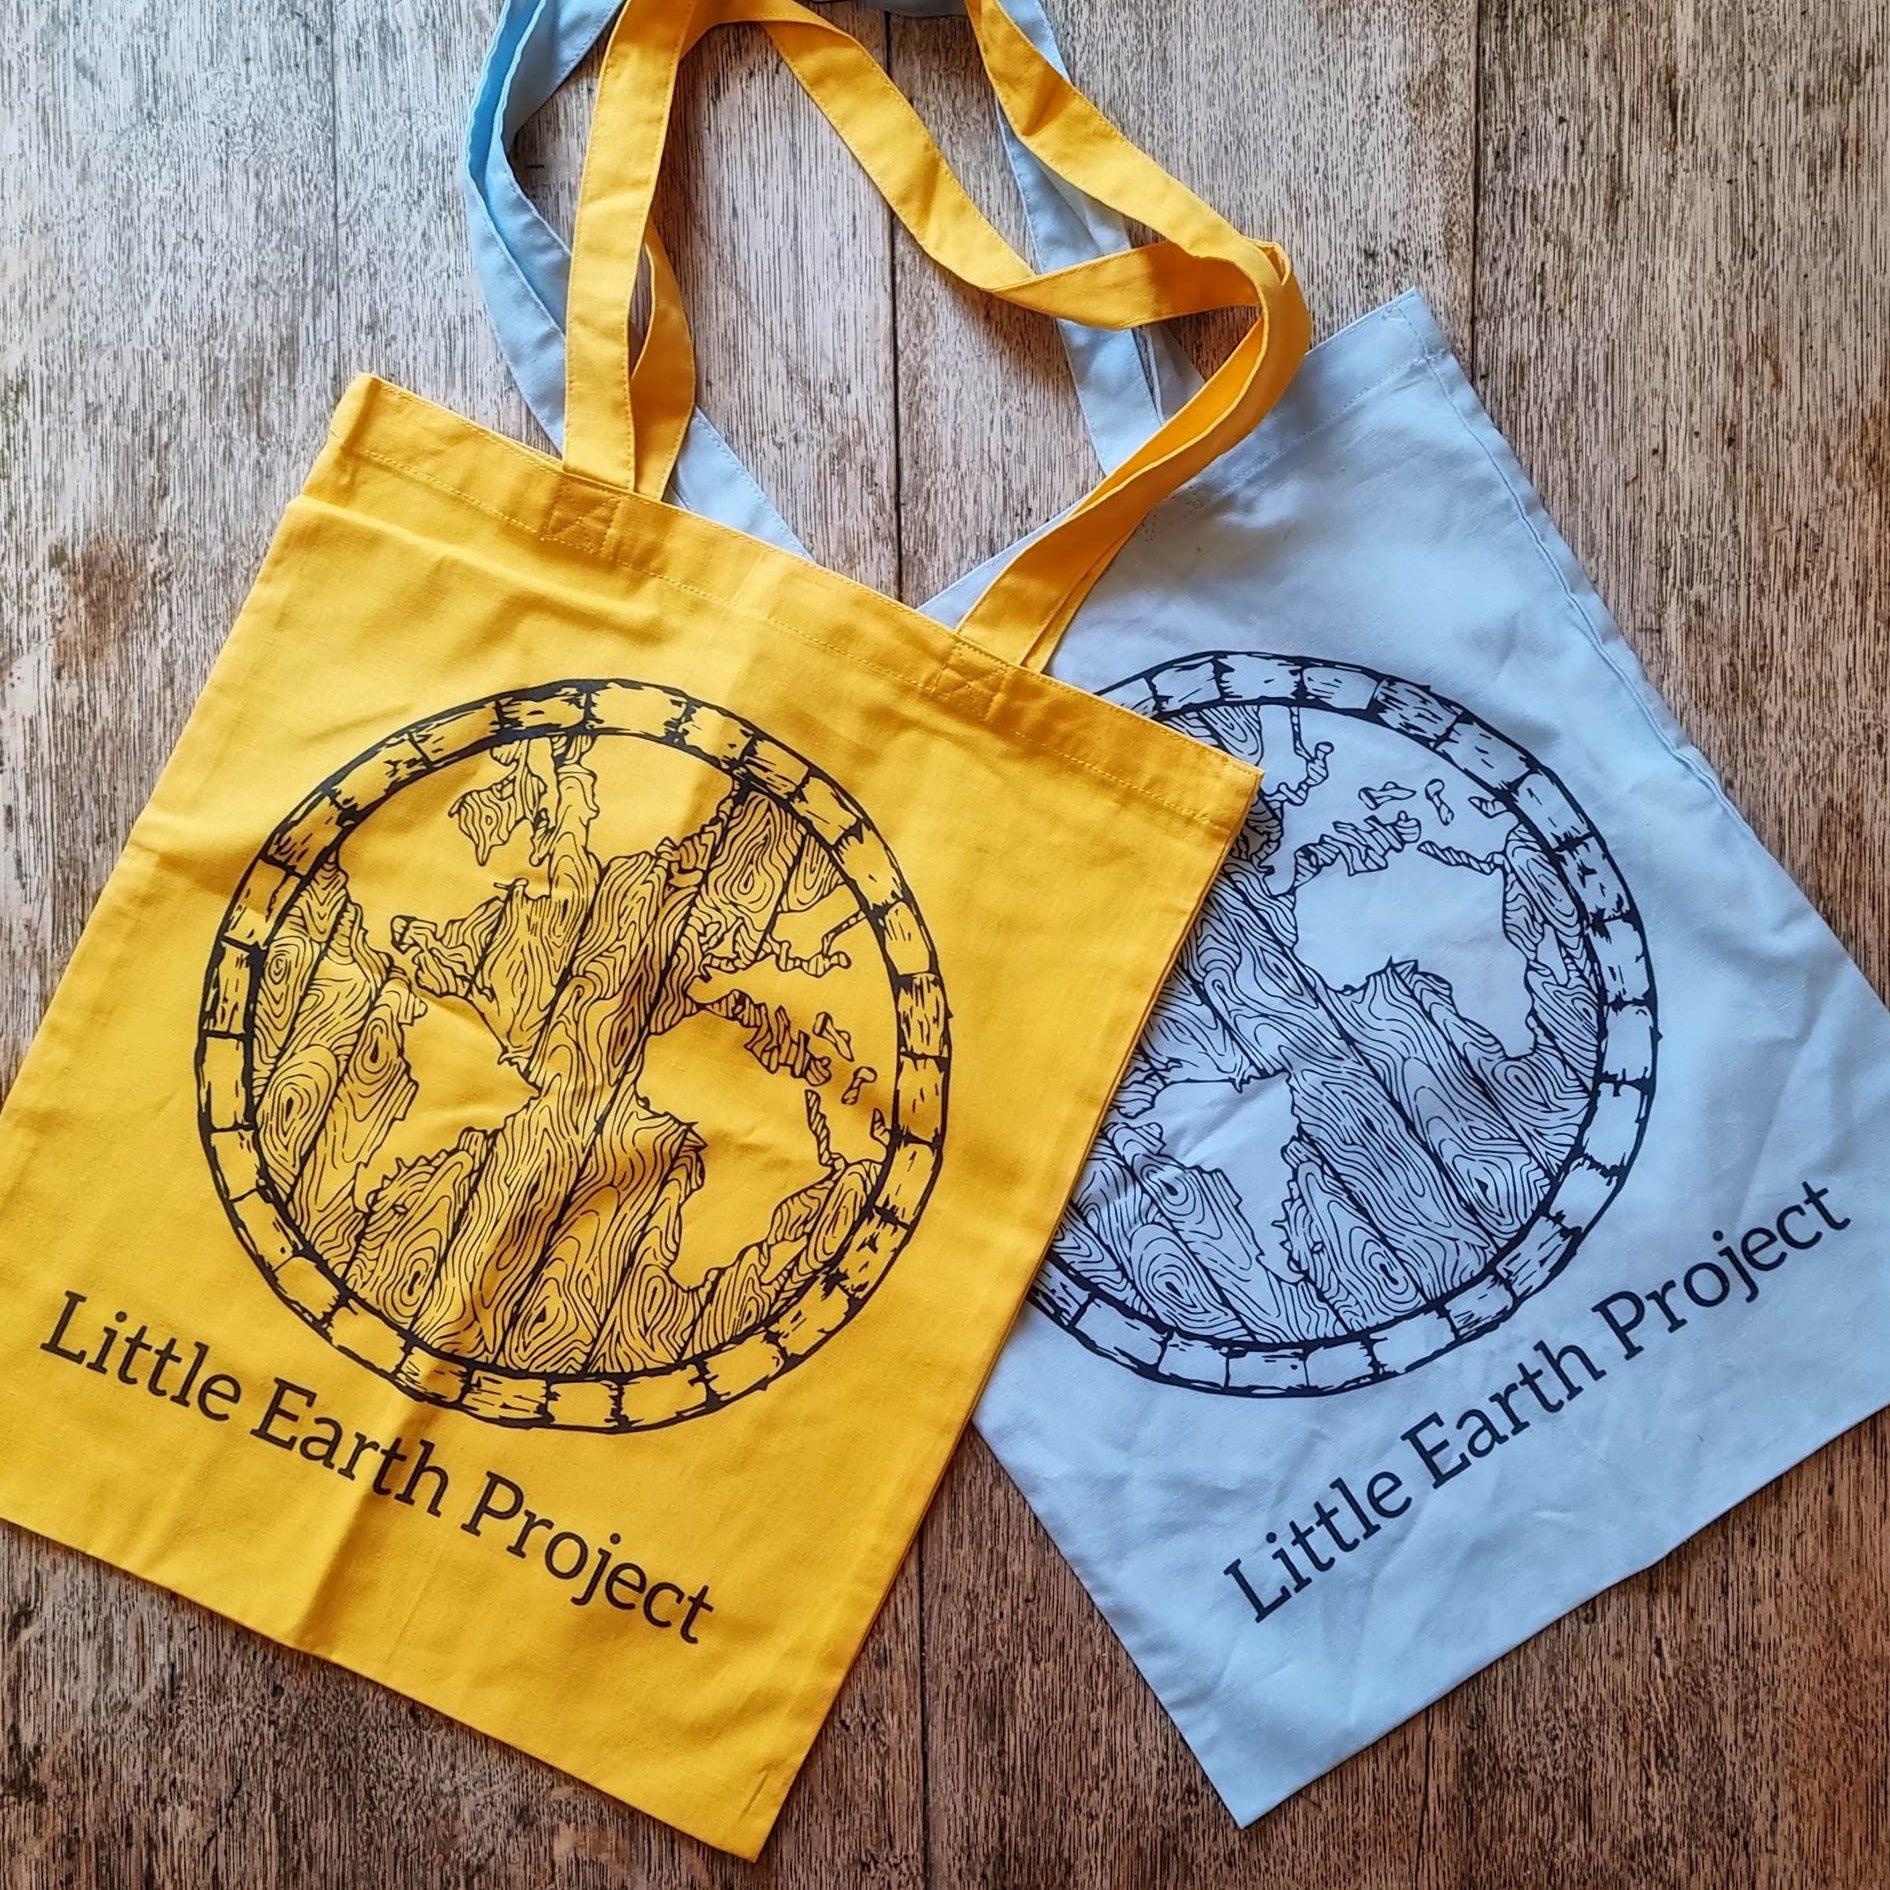 Little Earth Project Tote Bags